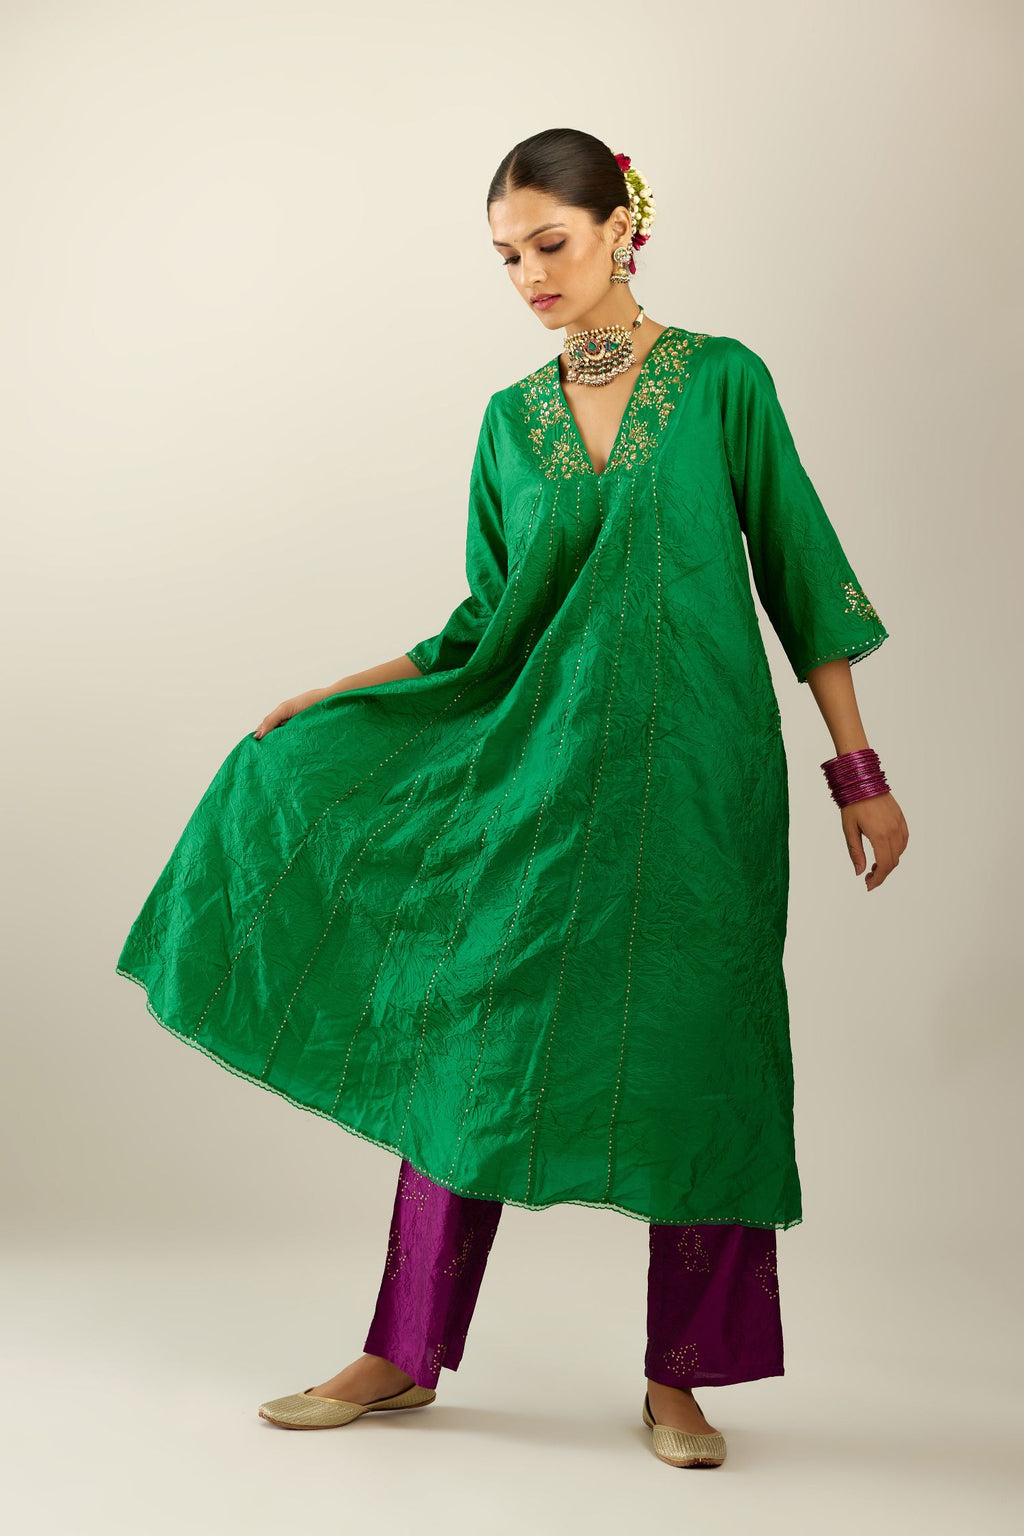 Grass green hand crushed silk kurta dress set with a V neck embroidered yoke and panels.